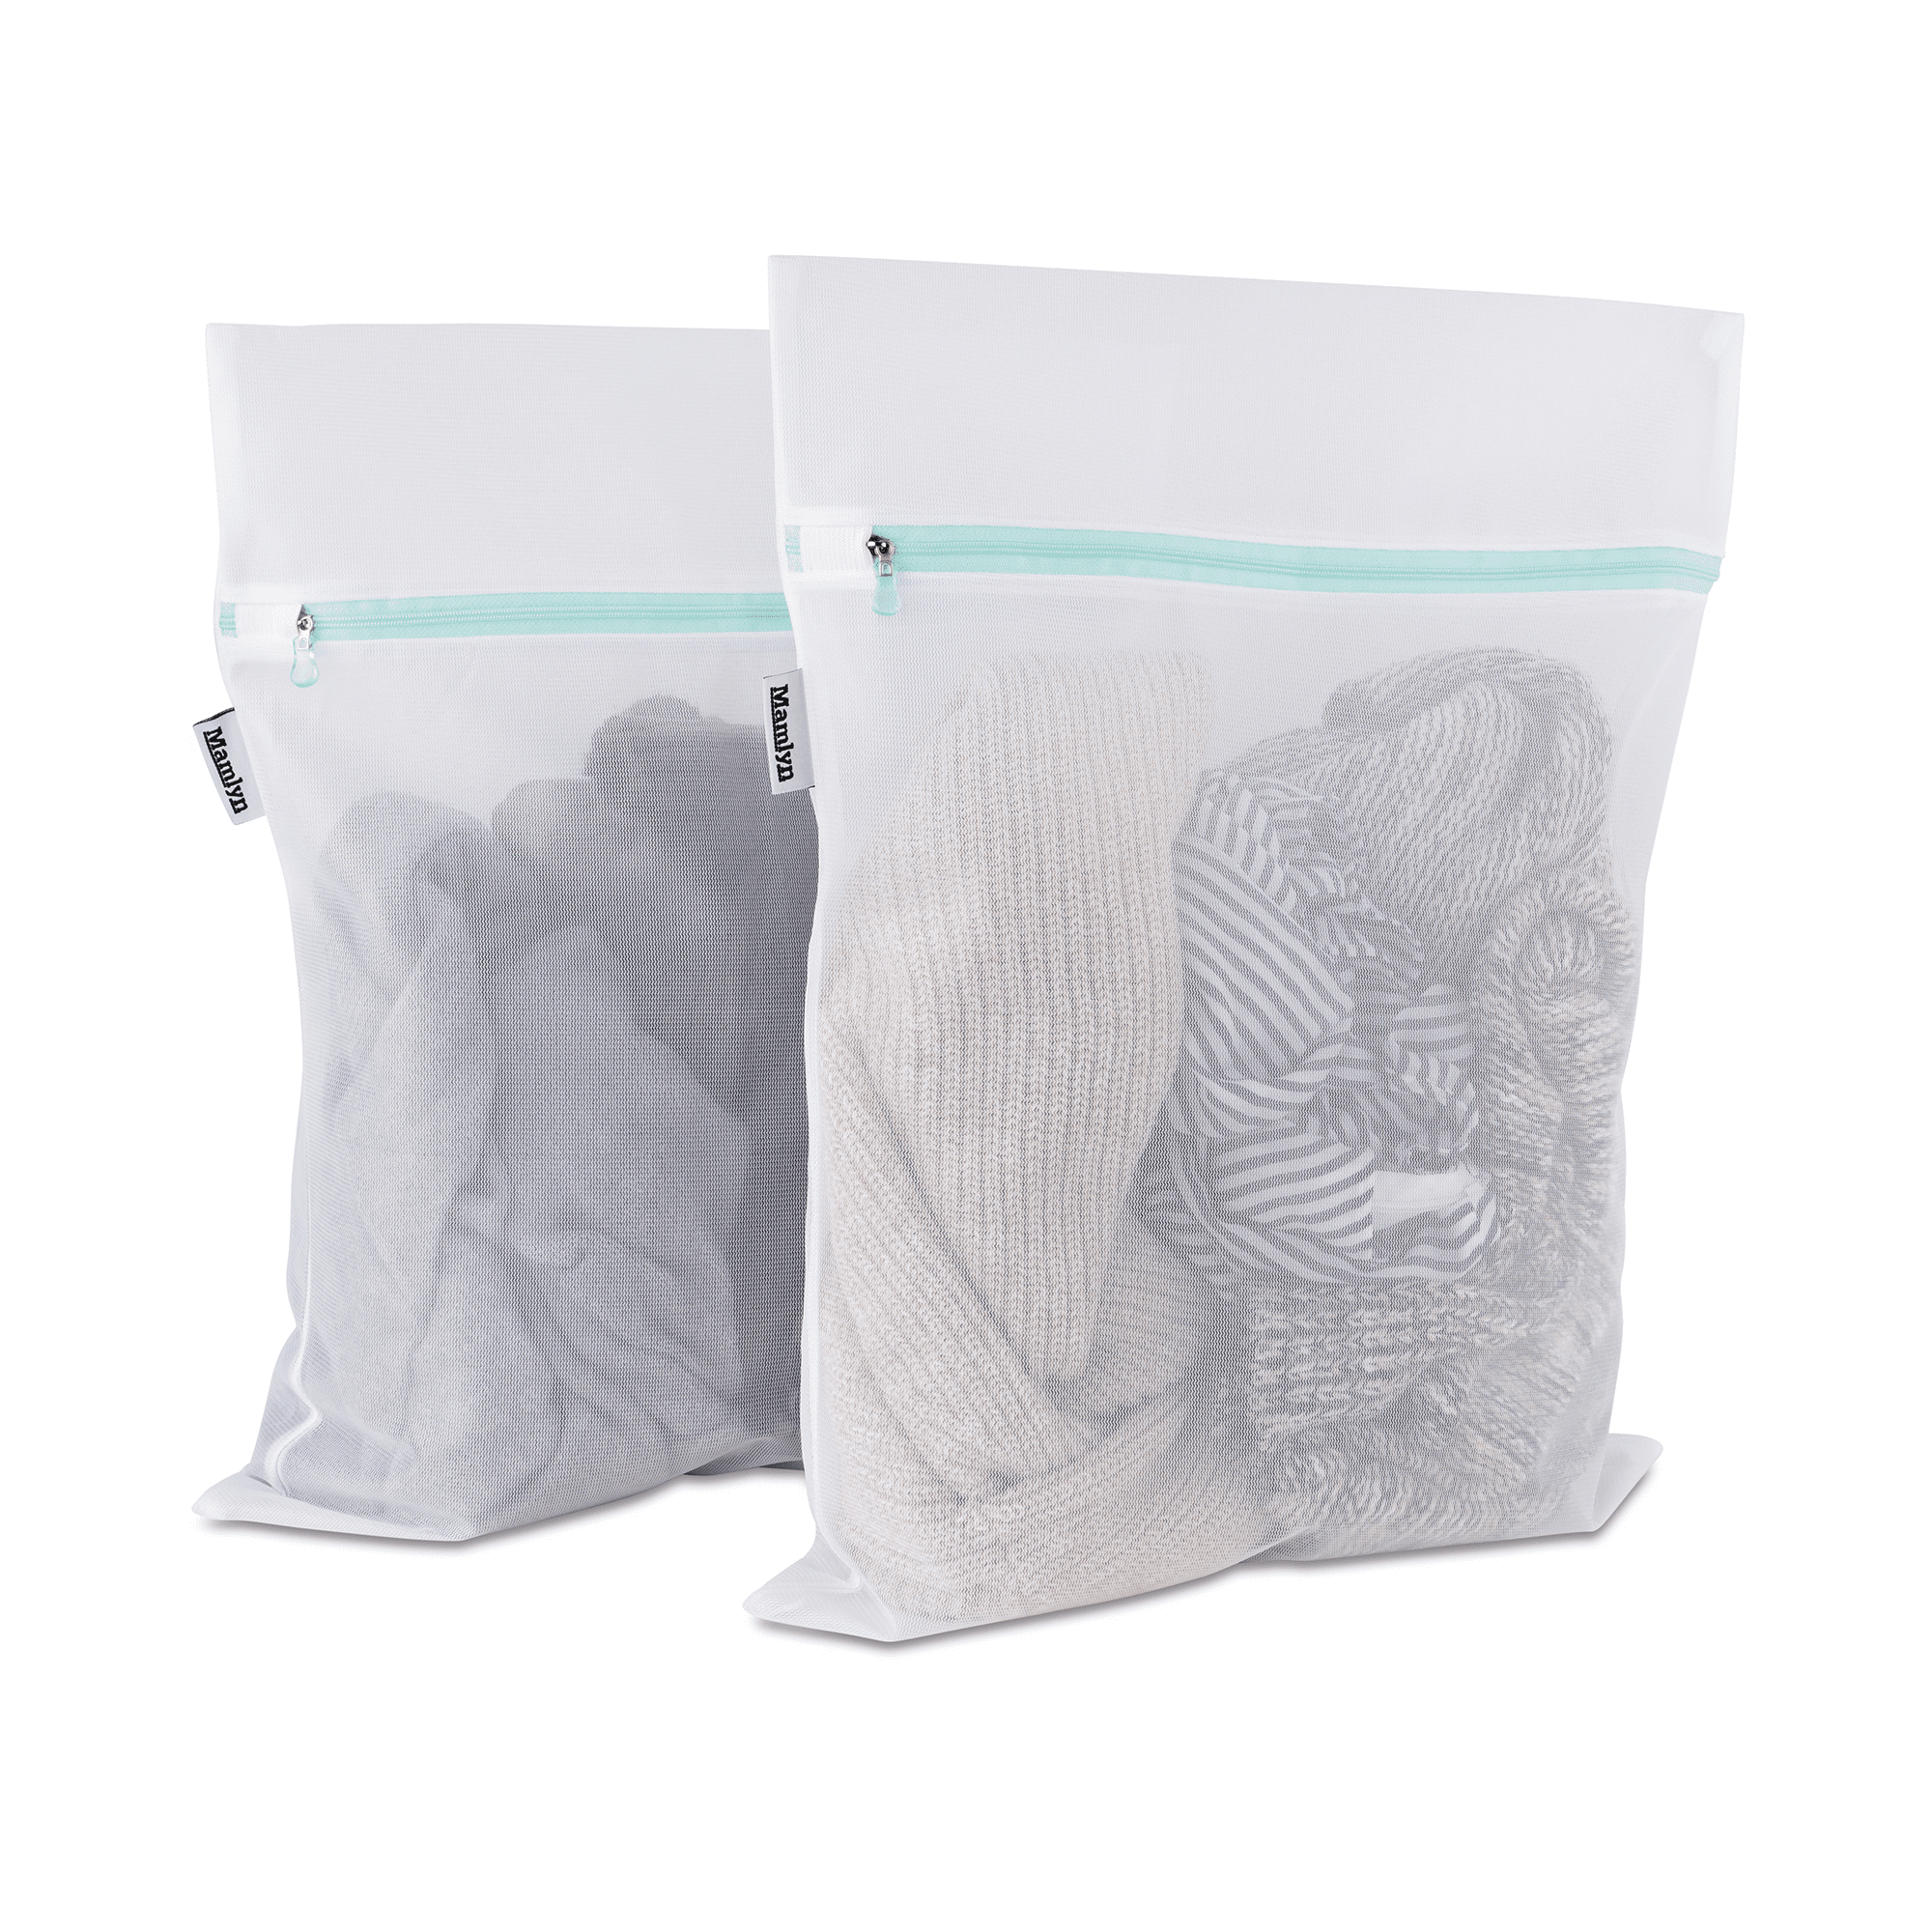 Russel 2pk Large & Small Net Laundry Wash Washing Lingerie Bag 48x40 & 32x22cm 